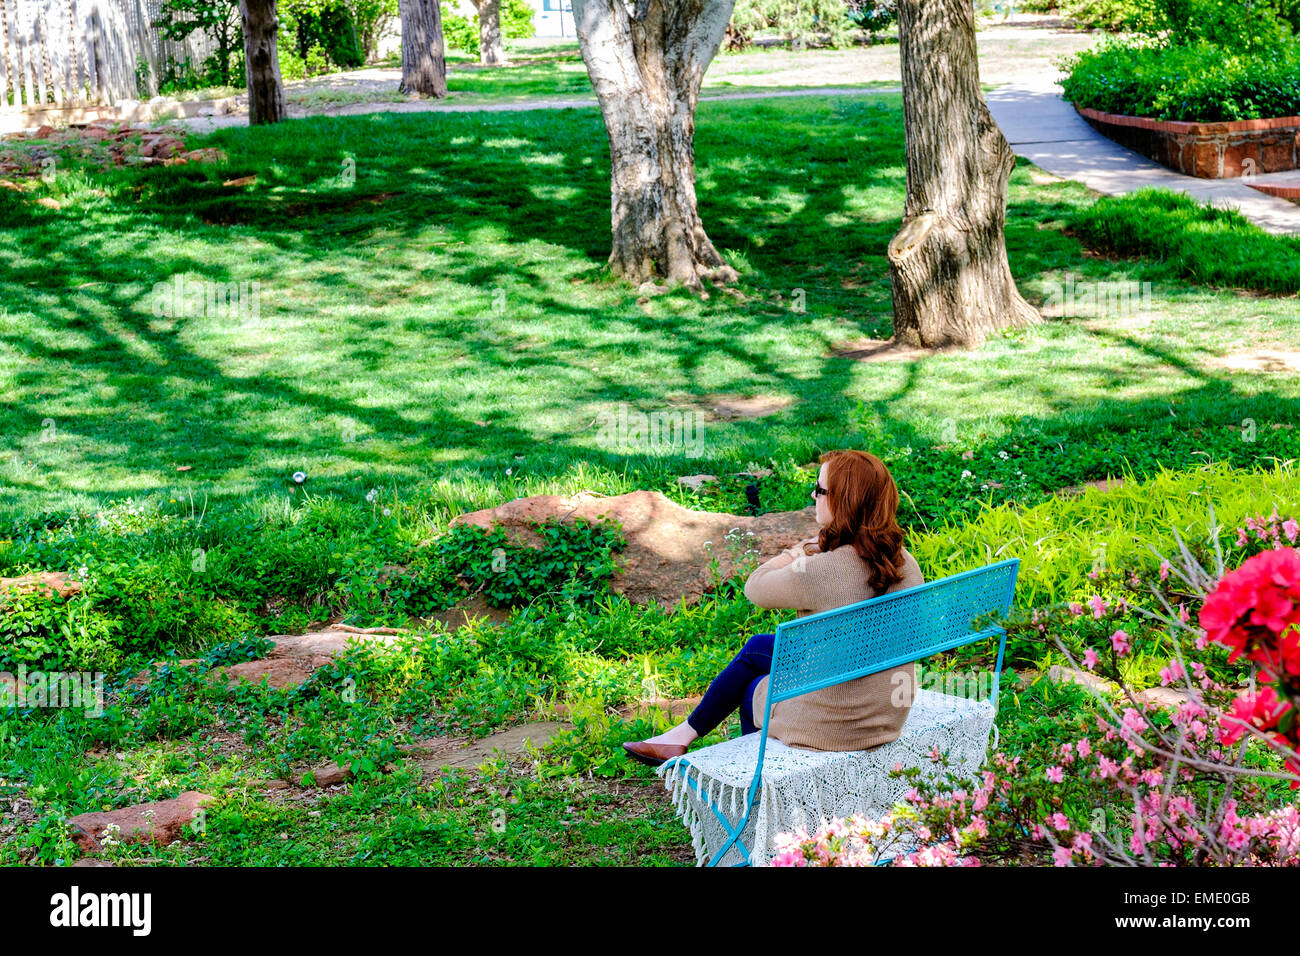 A Caucasian, red-haired woman sits on a bench and enjoys a Spring day in Will Rogers park in Oklahoma City, Oklahoma,USA. Stock Photo